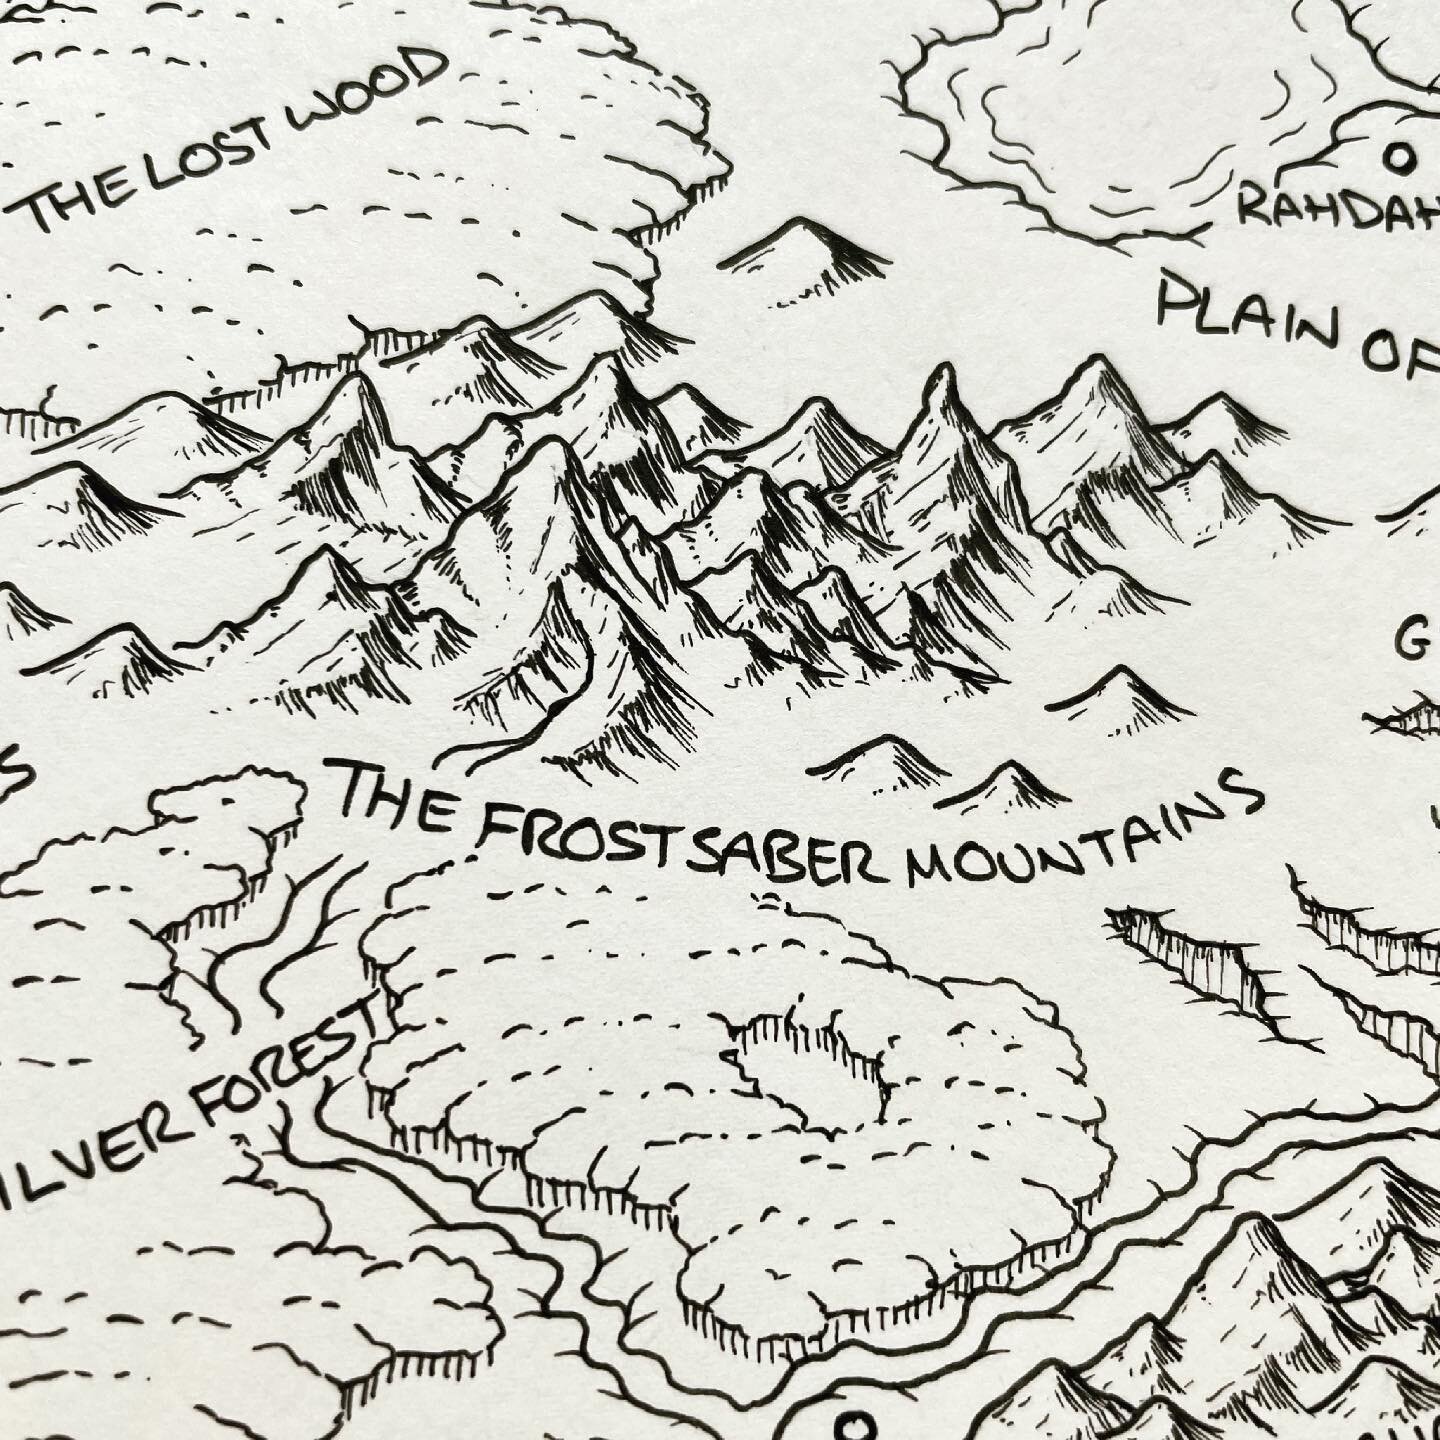 What drives you to use new styles and techniques in your art? 
Here&rsquo;s a sneak peak from an upcoming YouTube video (link in bio), you can learn how easy these mountains are in my current video. 

#famtasymap #fantasy #rpg #rpgmap #mapmaking #map